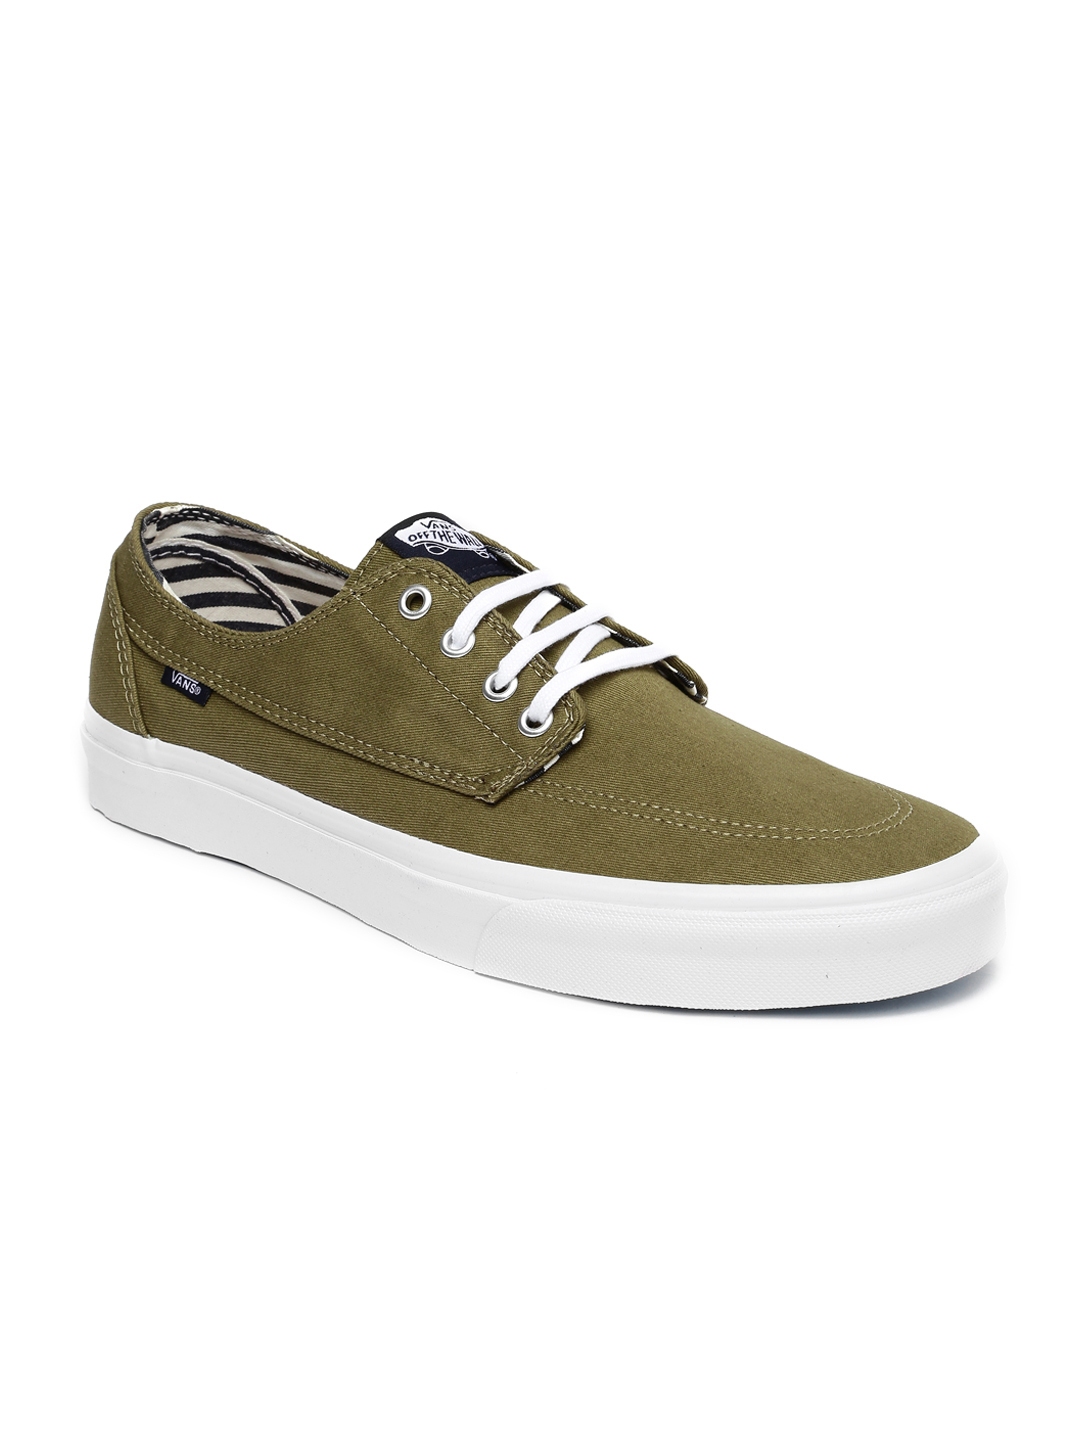 Buy Vans Men Olive Green Casual Shoes - Casual Shoes for Men 1274491 ...